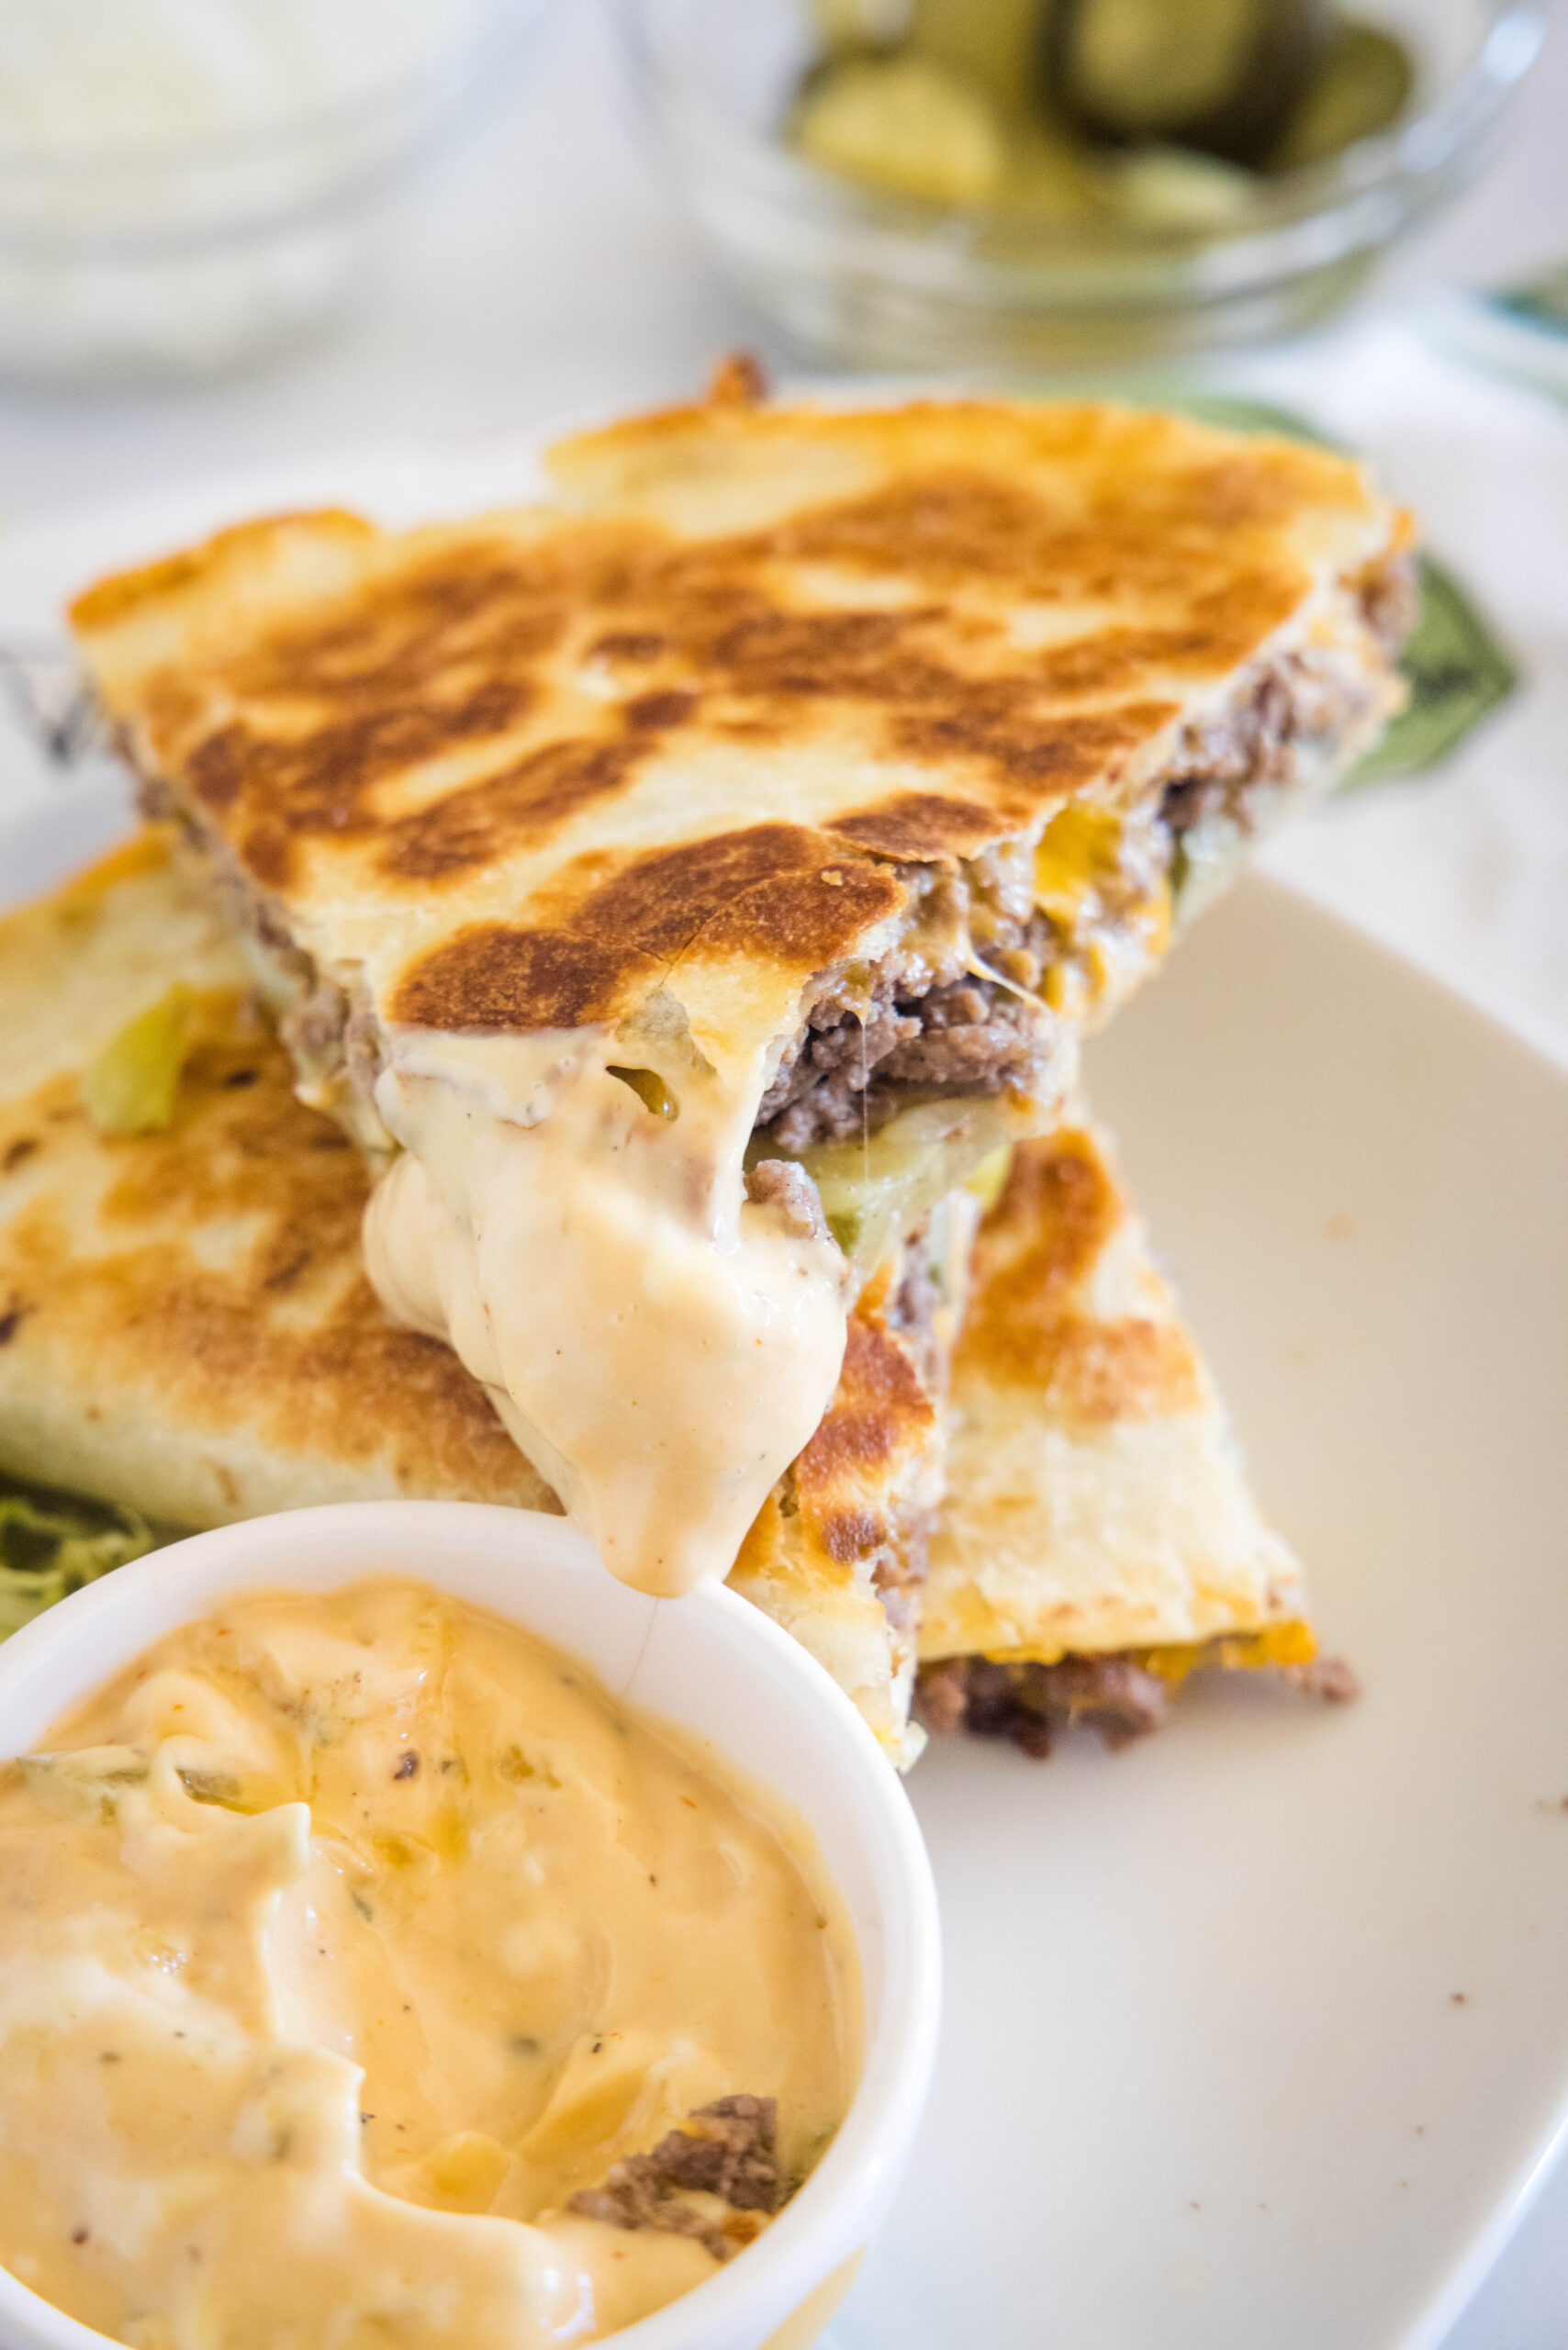 A slice of cheeseburger quesadilla dipped into a bowl of burger sauce, stacked on top of another slice on a white plate.